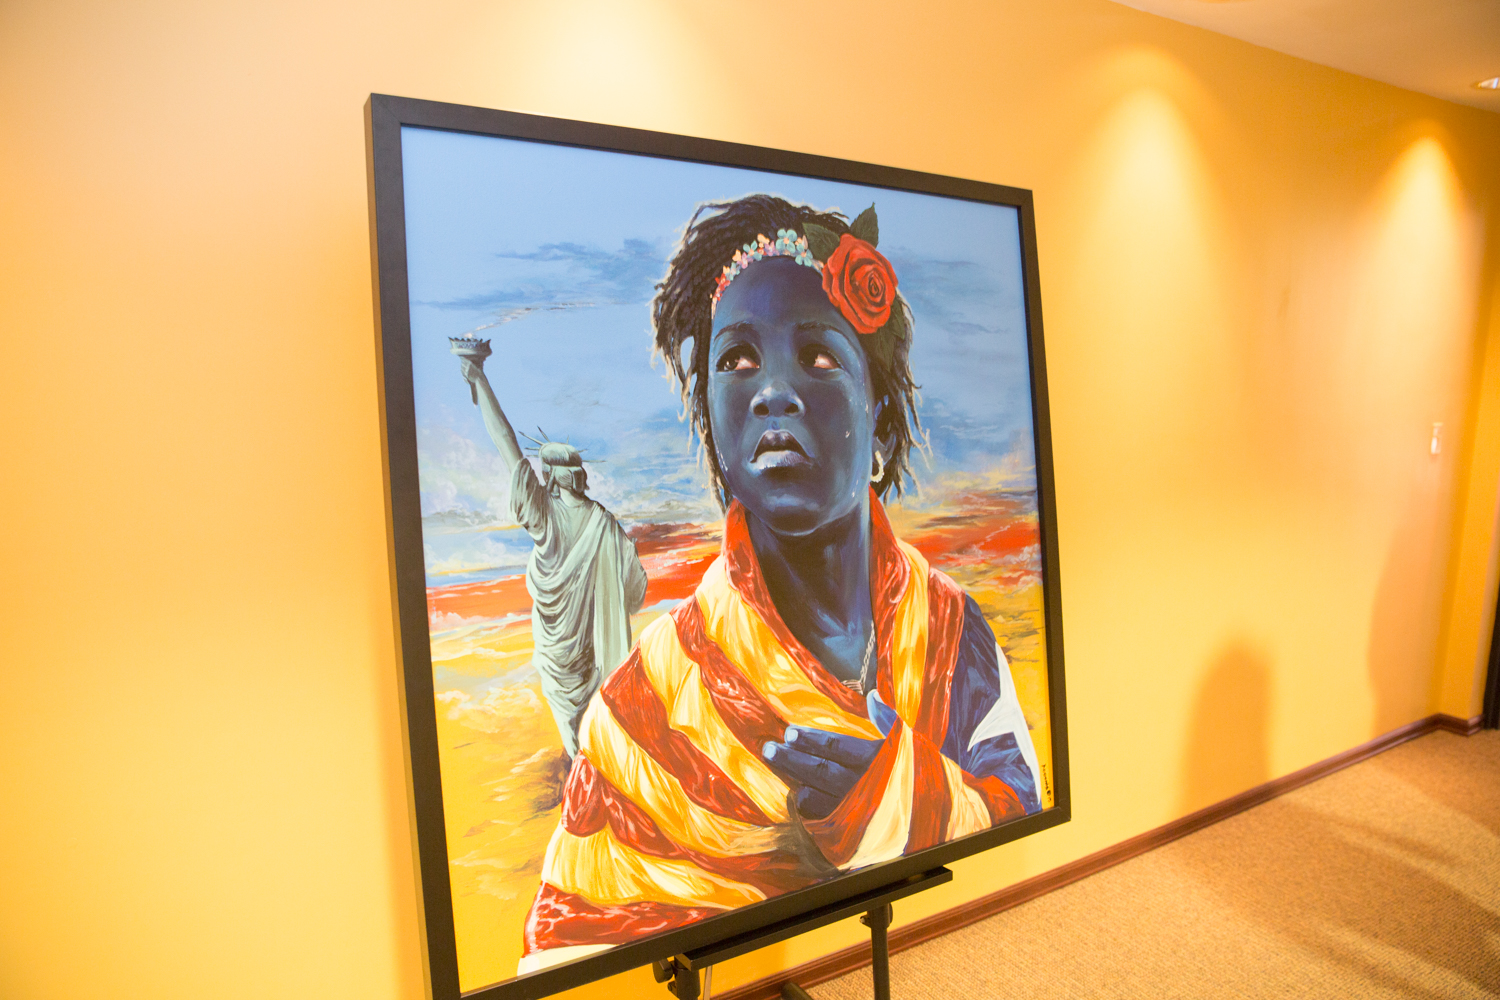 A painting of a black woman is on display in an office.